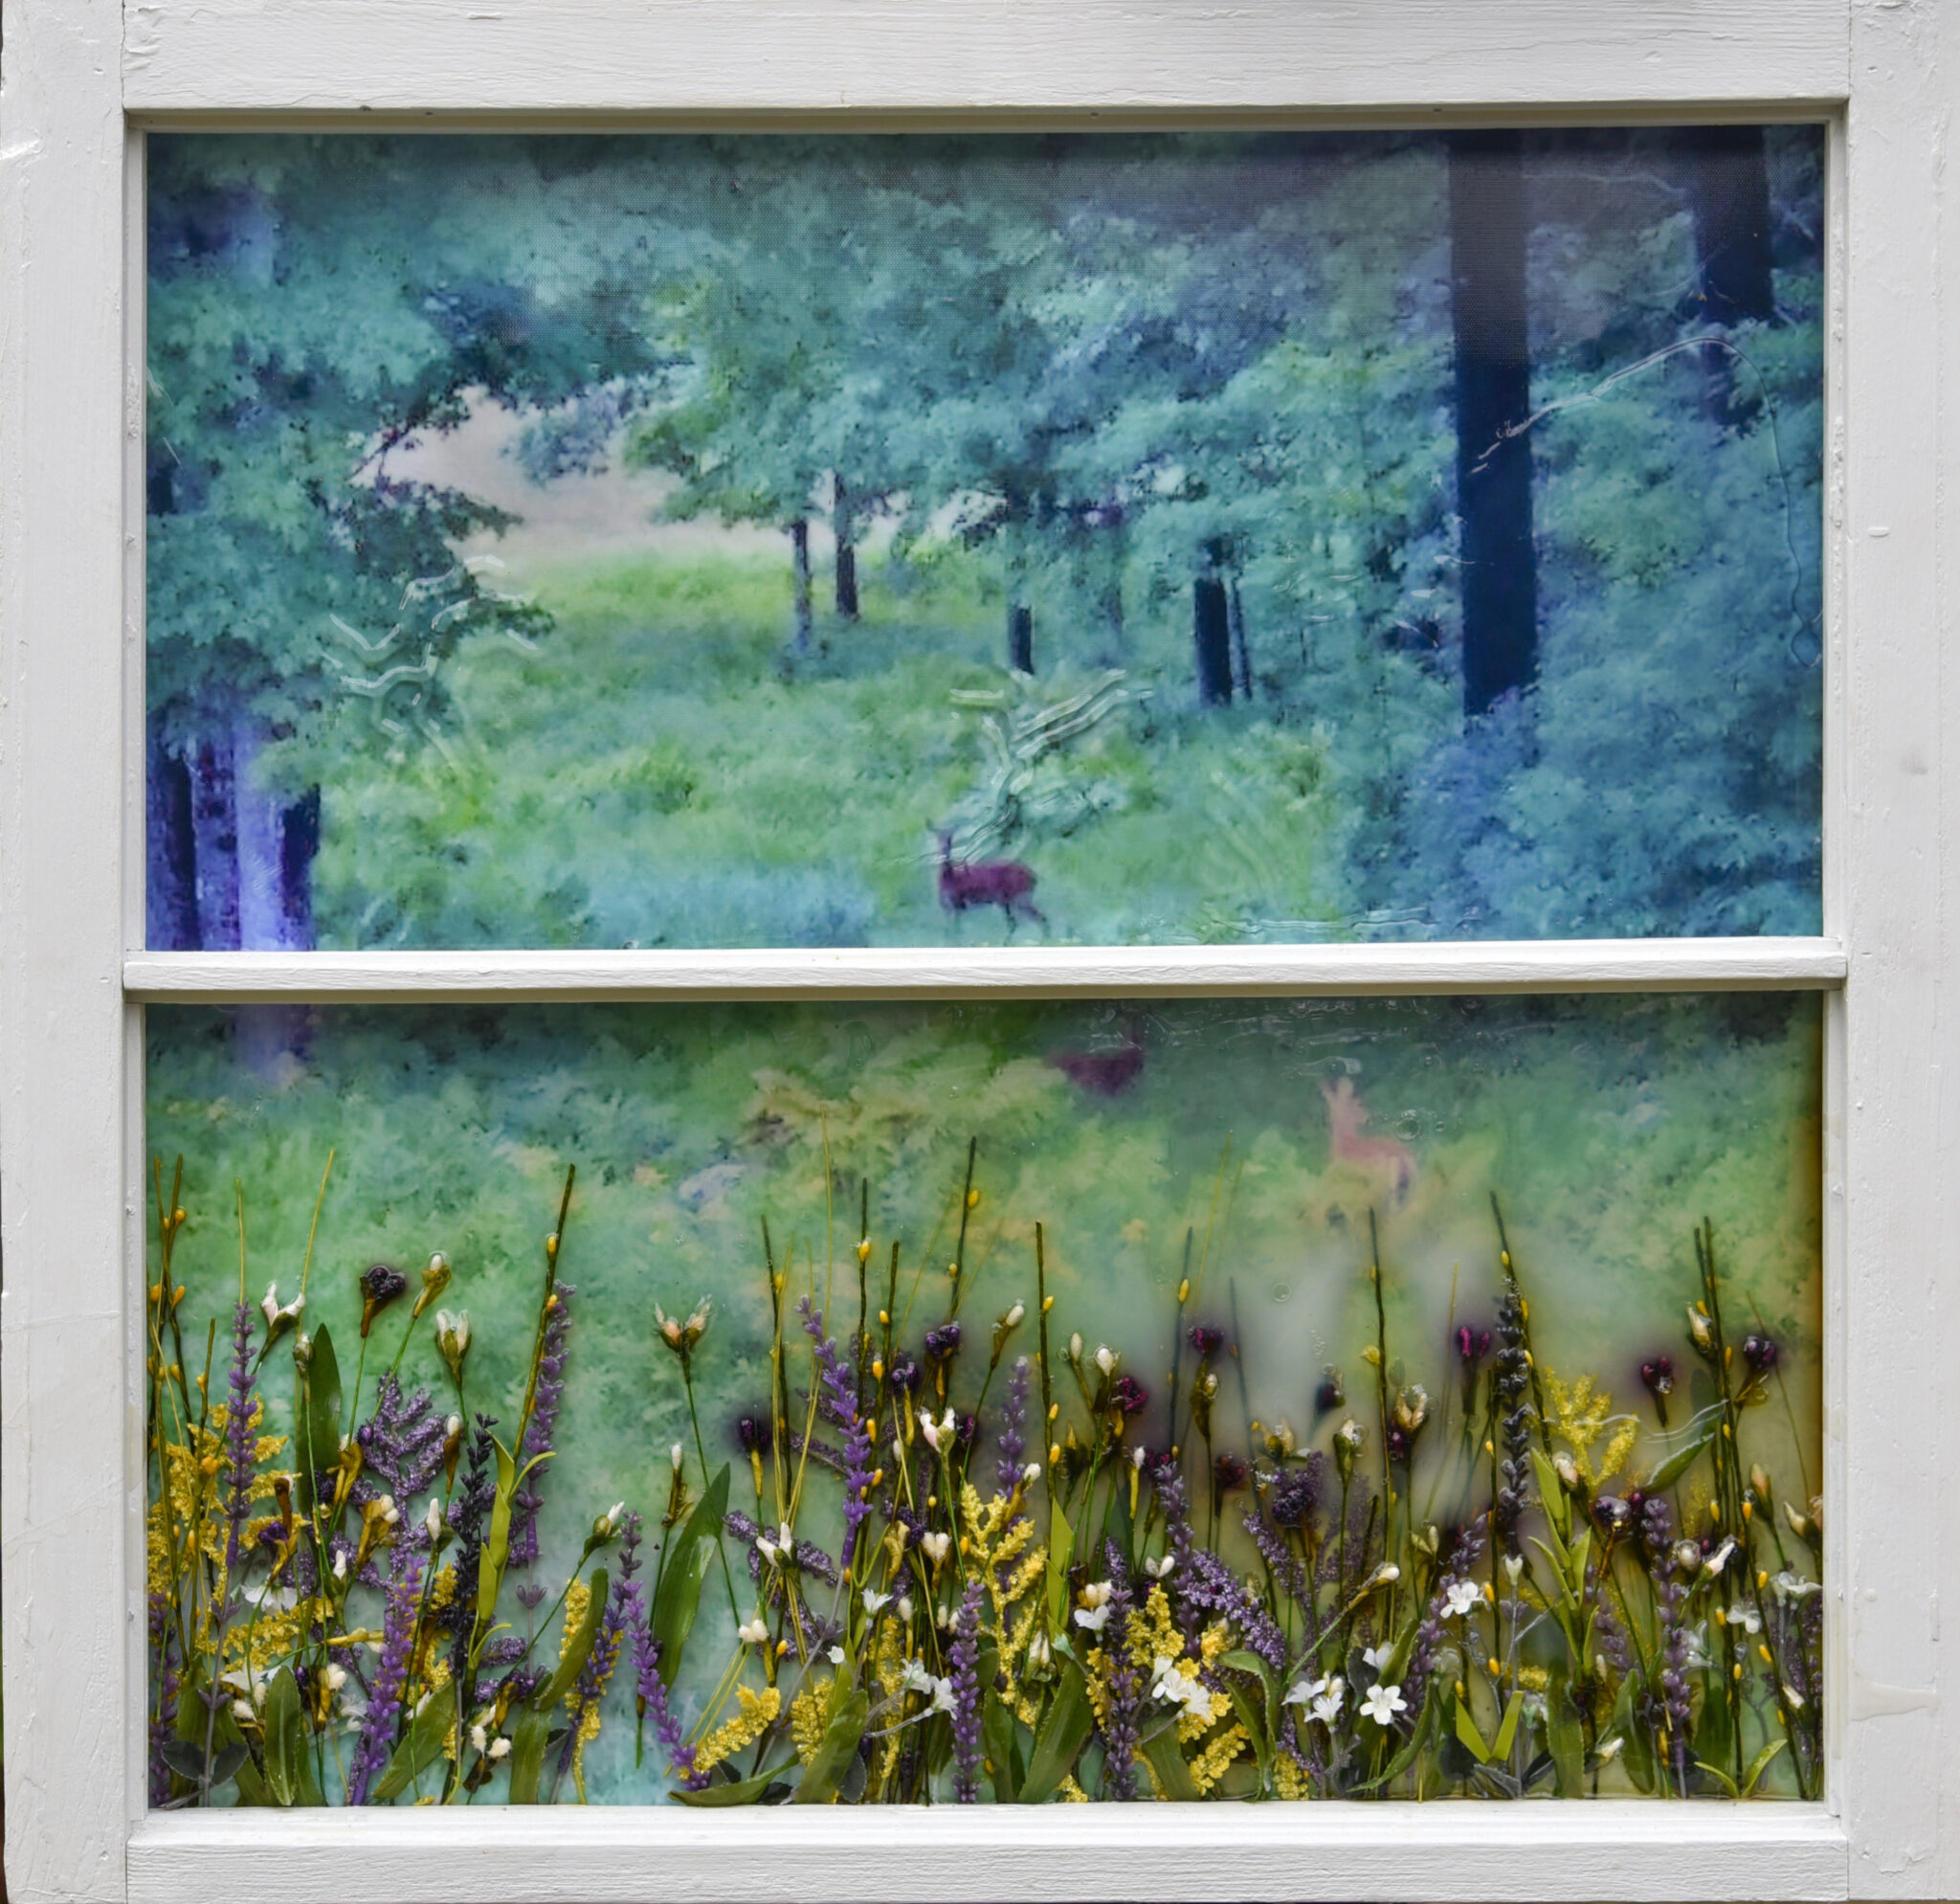 Acrylic sculpture of a window pane with landscape and flowers on the glass  | Art by Danielle O'Hanlon